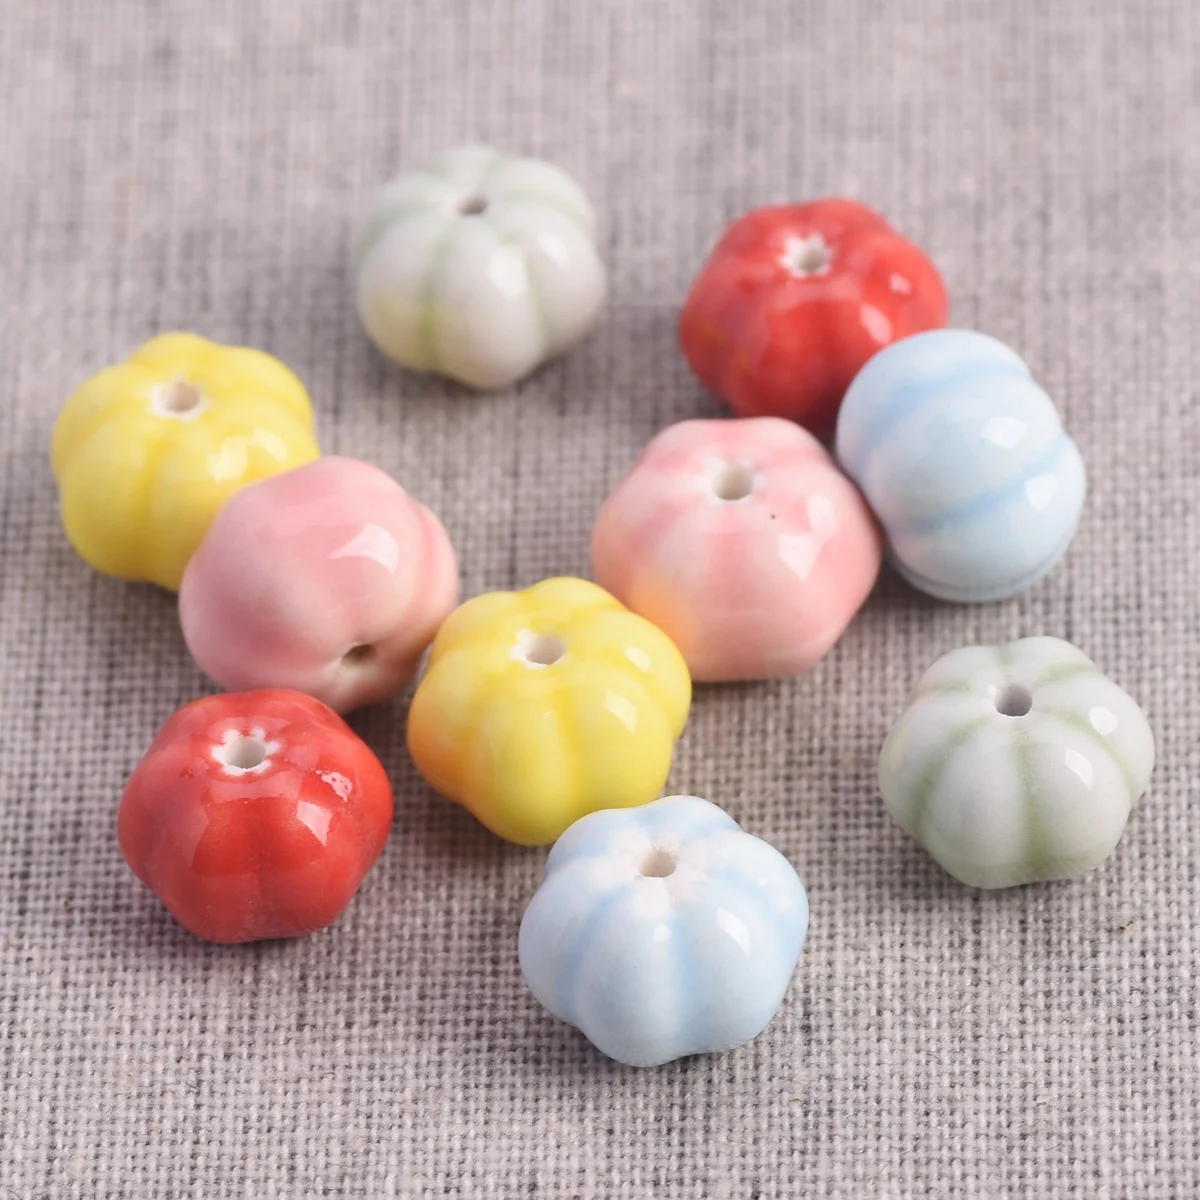 5pcs Round Pumpkin Shape 13x10mm Handmade Glaze Ceramic Porcelain Loose Spacer Beads For Jewelry Making DIY Findings